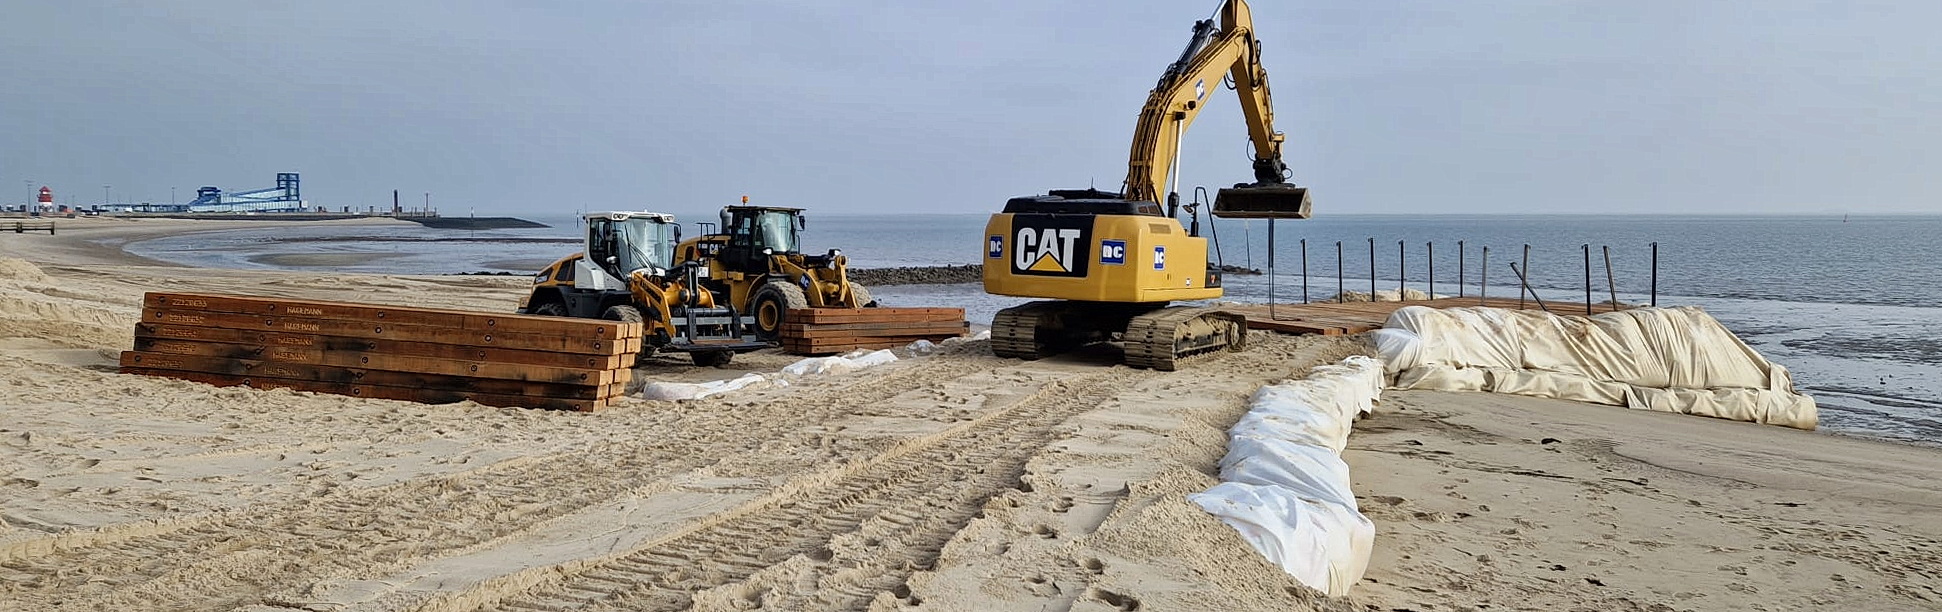 Two wheel loaders and an excavator at work on a construction site on the beach.